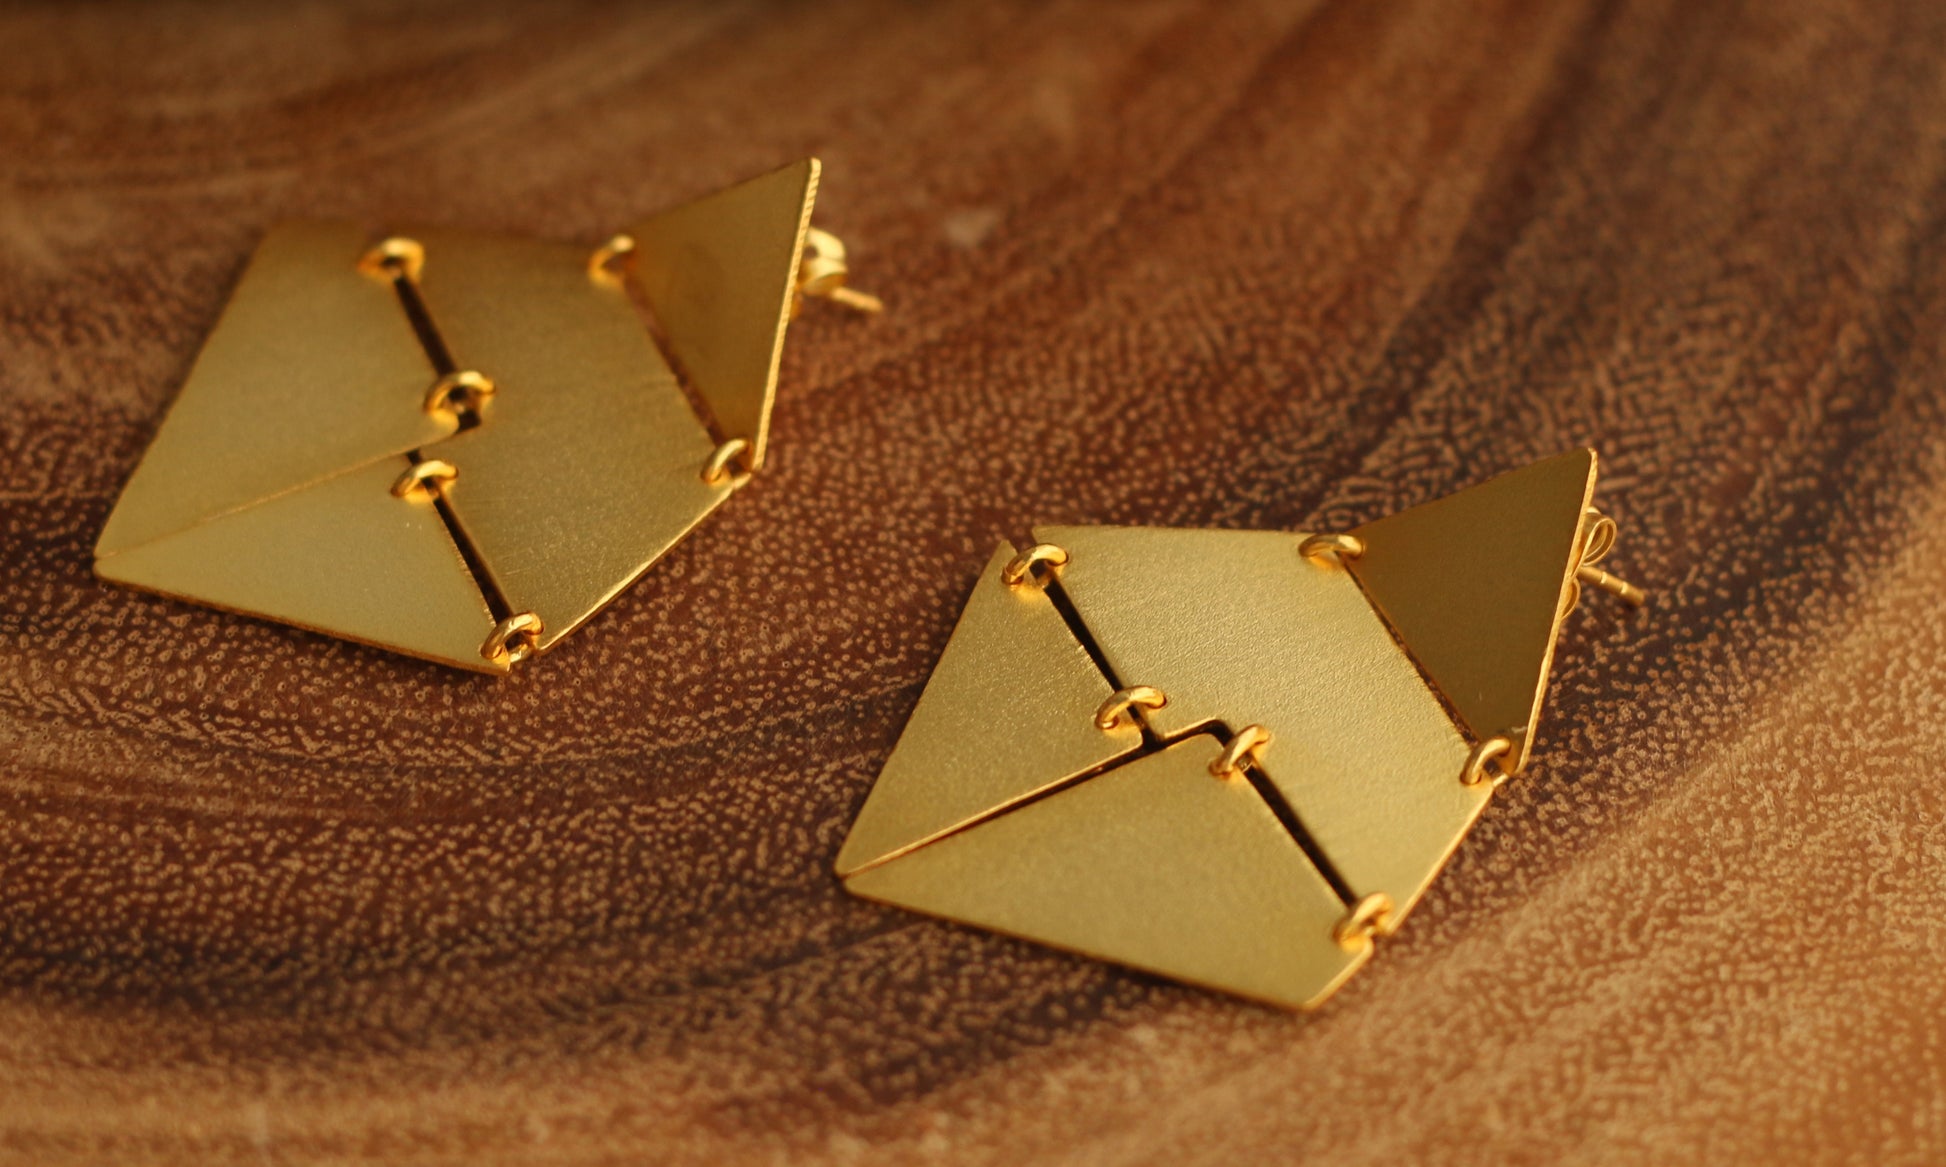 PYRAMID HANDCRAFTED  18K GOLD PLATED EARRINGS - The Glam Harbor